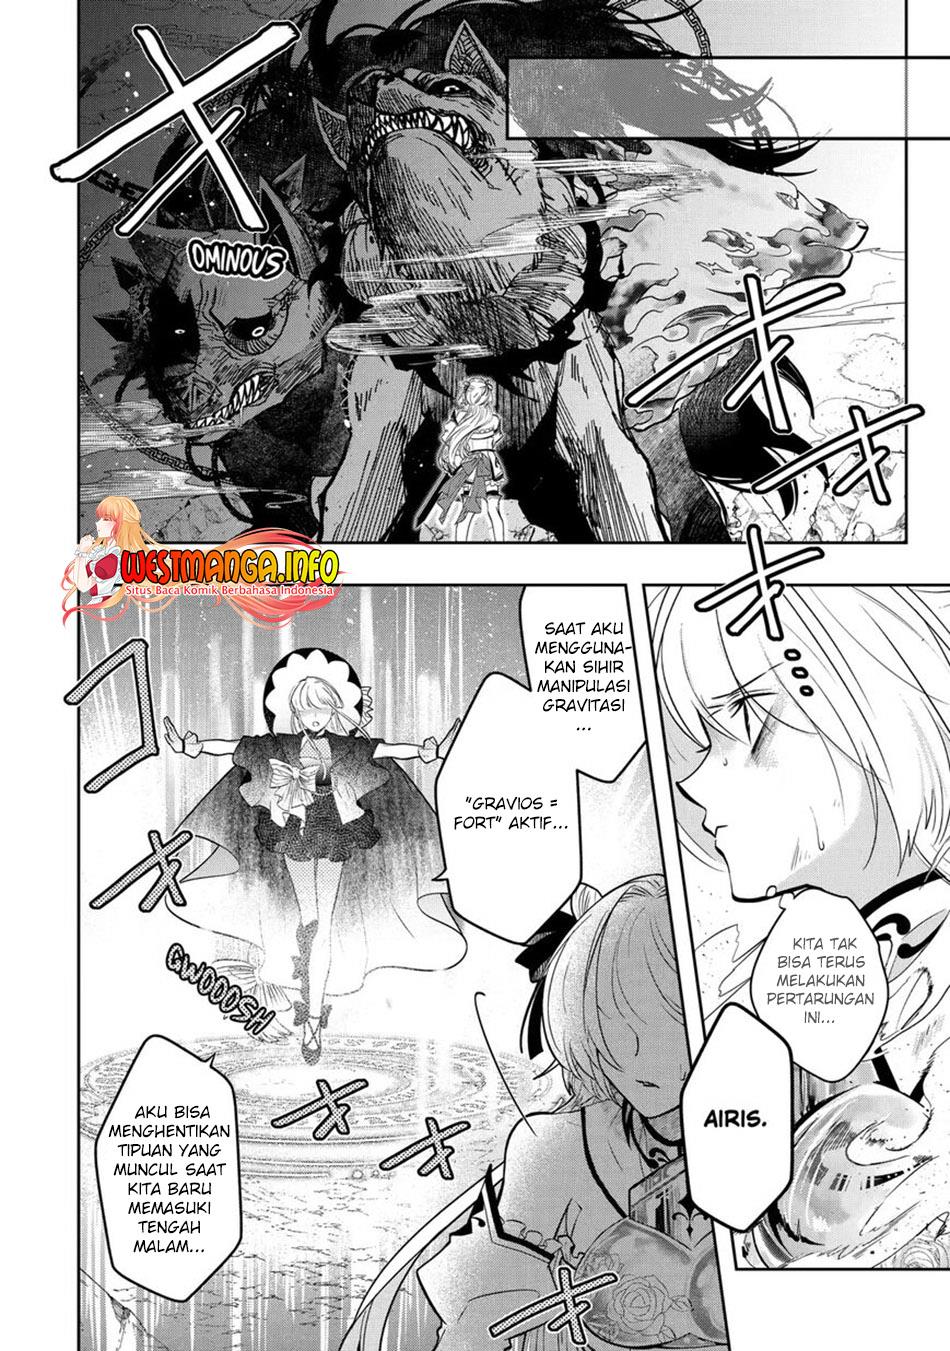 Level 0 Evil King Become the Adventurer In the New World Chapter 14